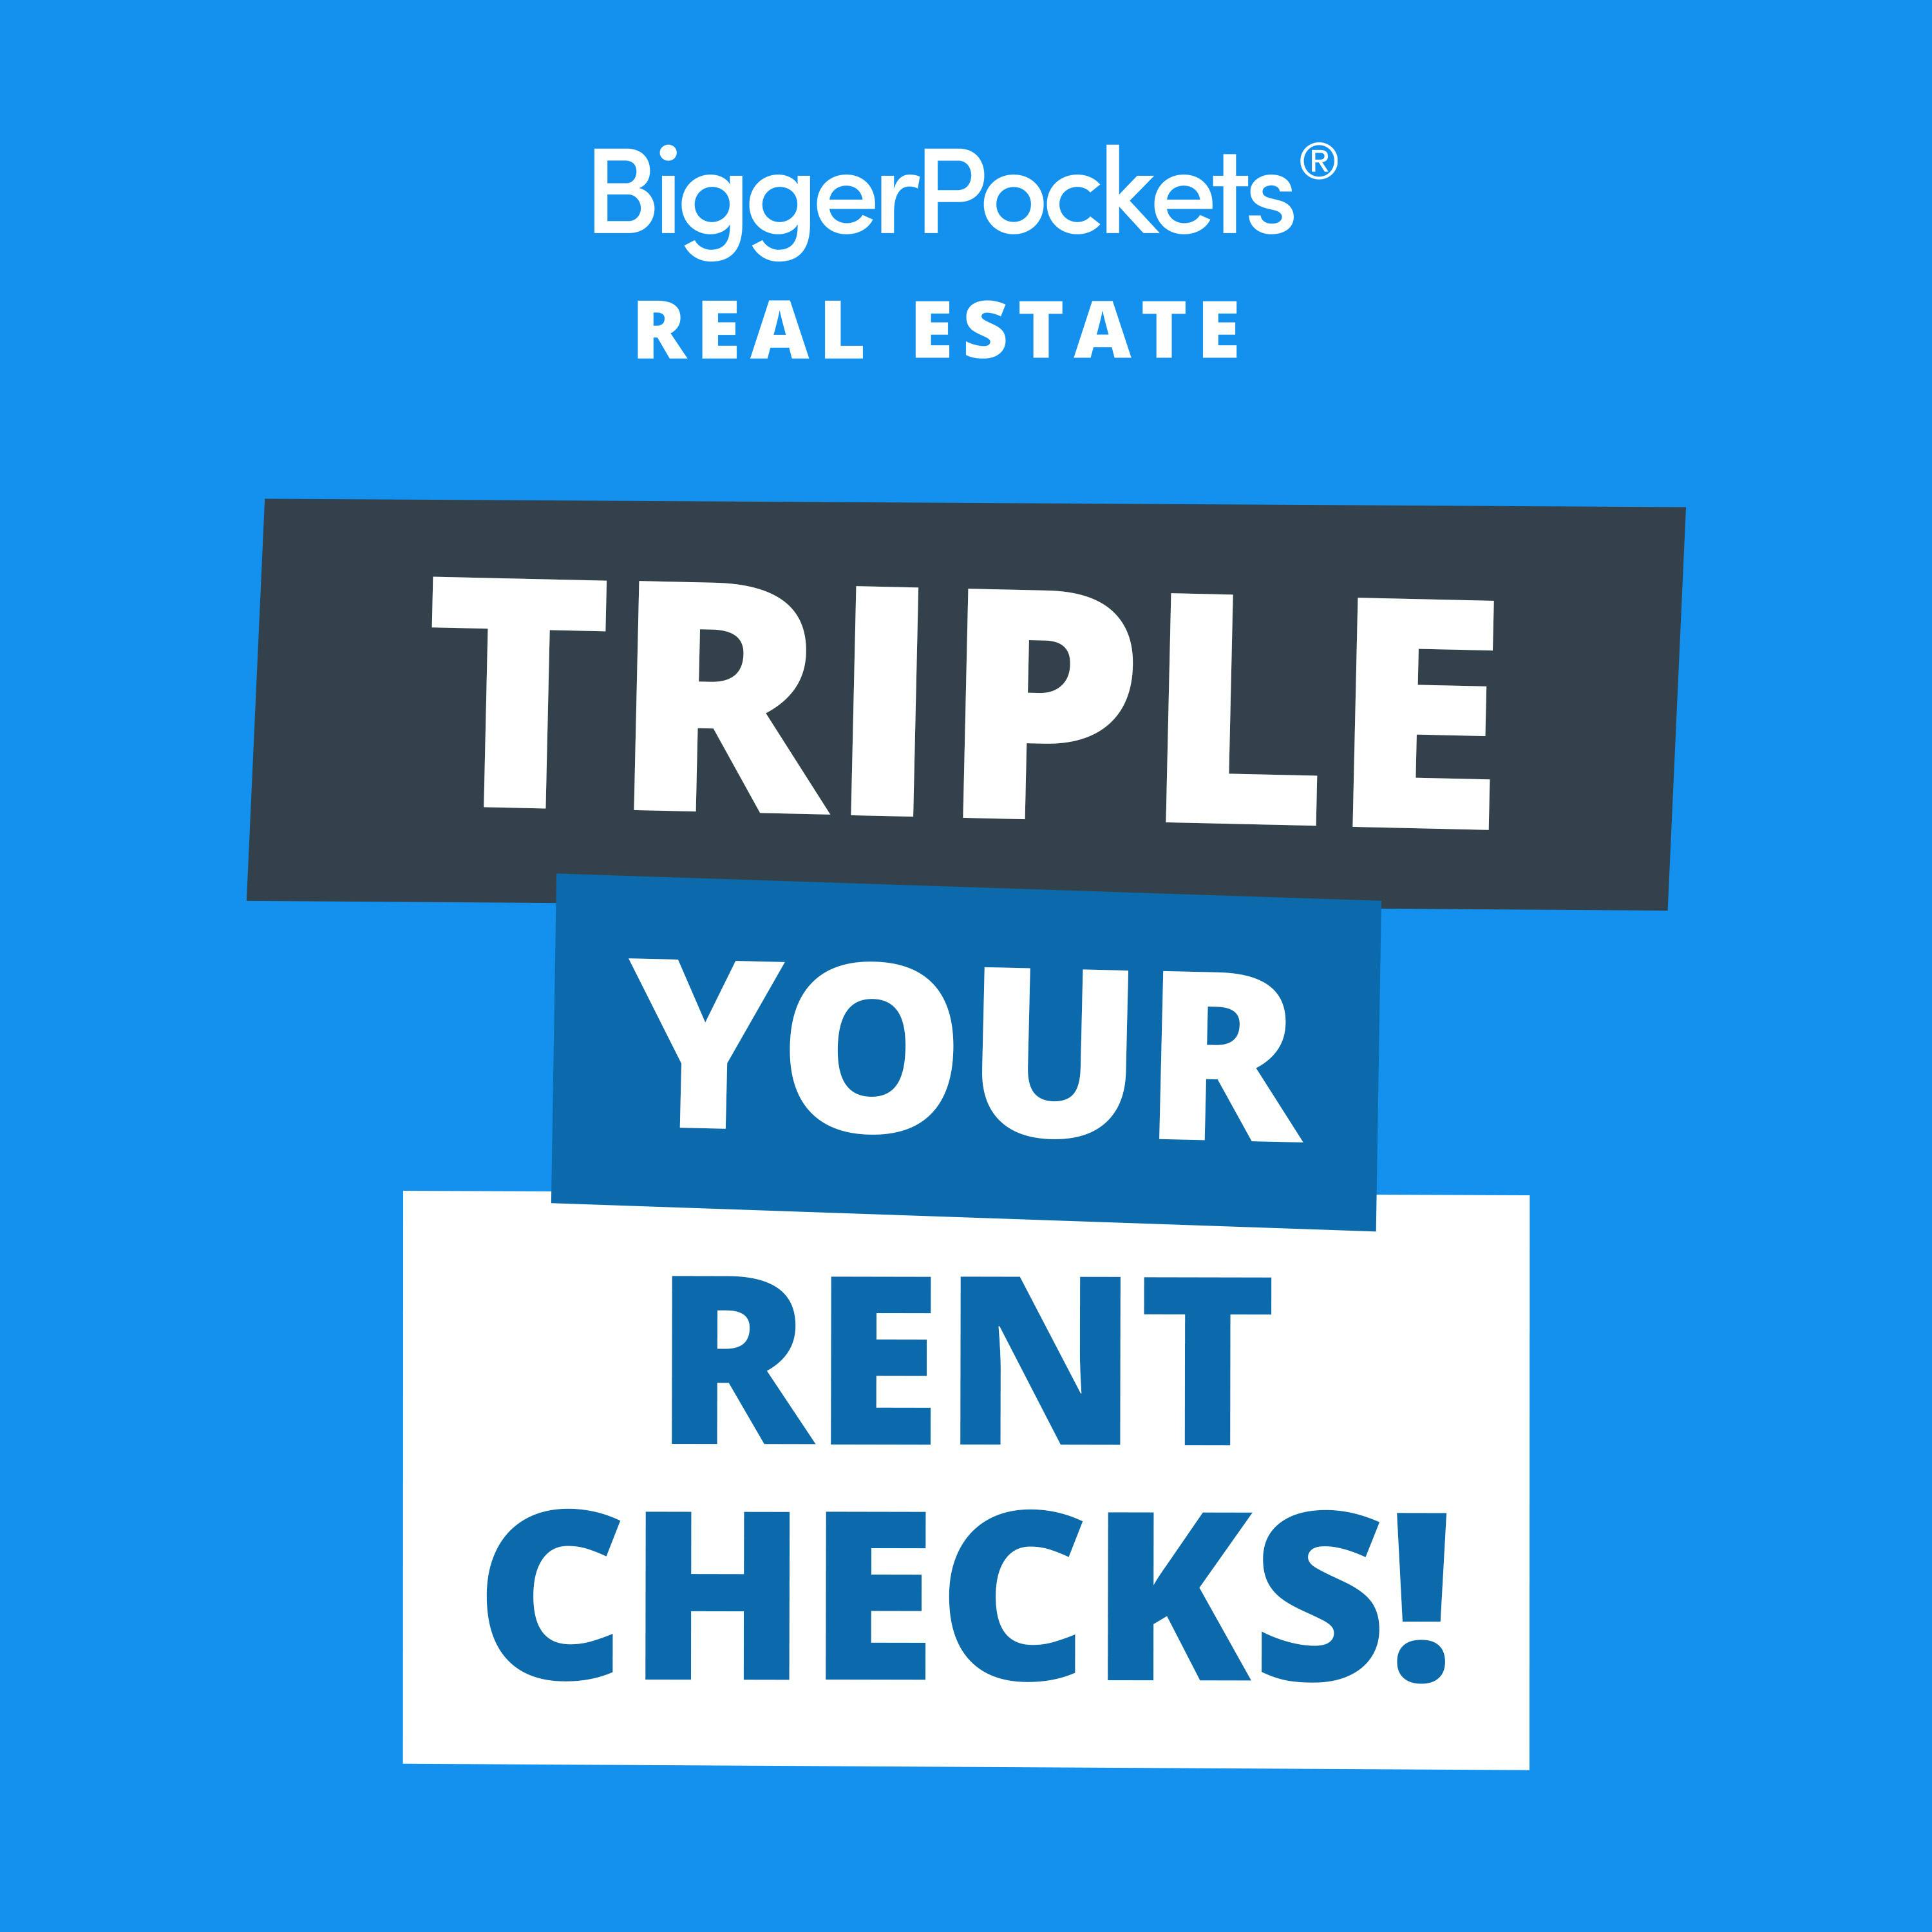 710: How to TRIPLE Your Rental Property Income with Group Home Investing w/Antoinette Munroe